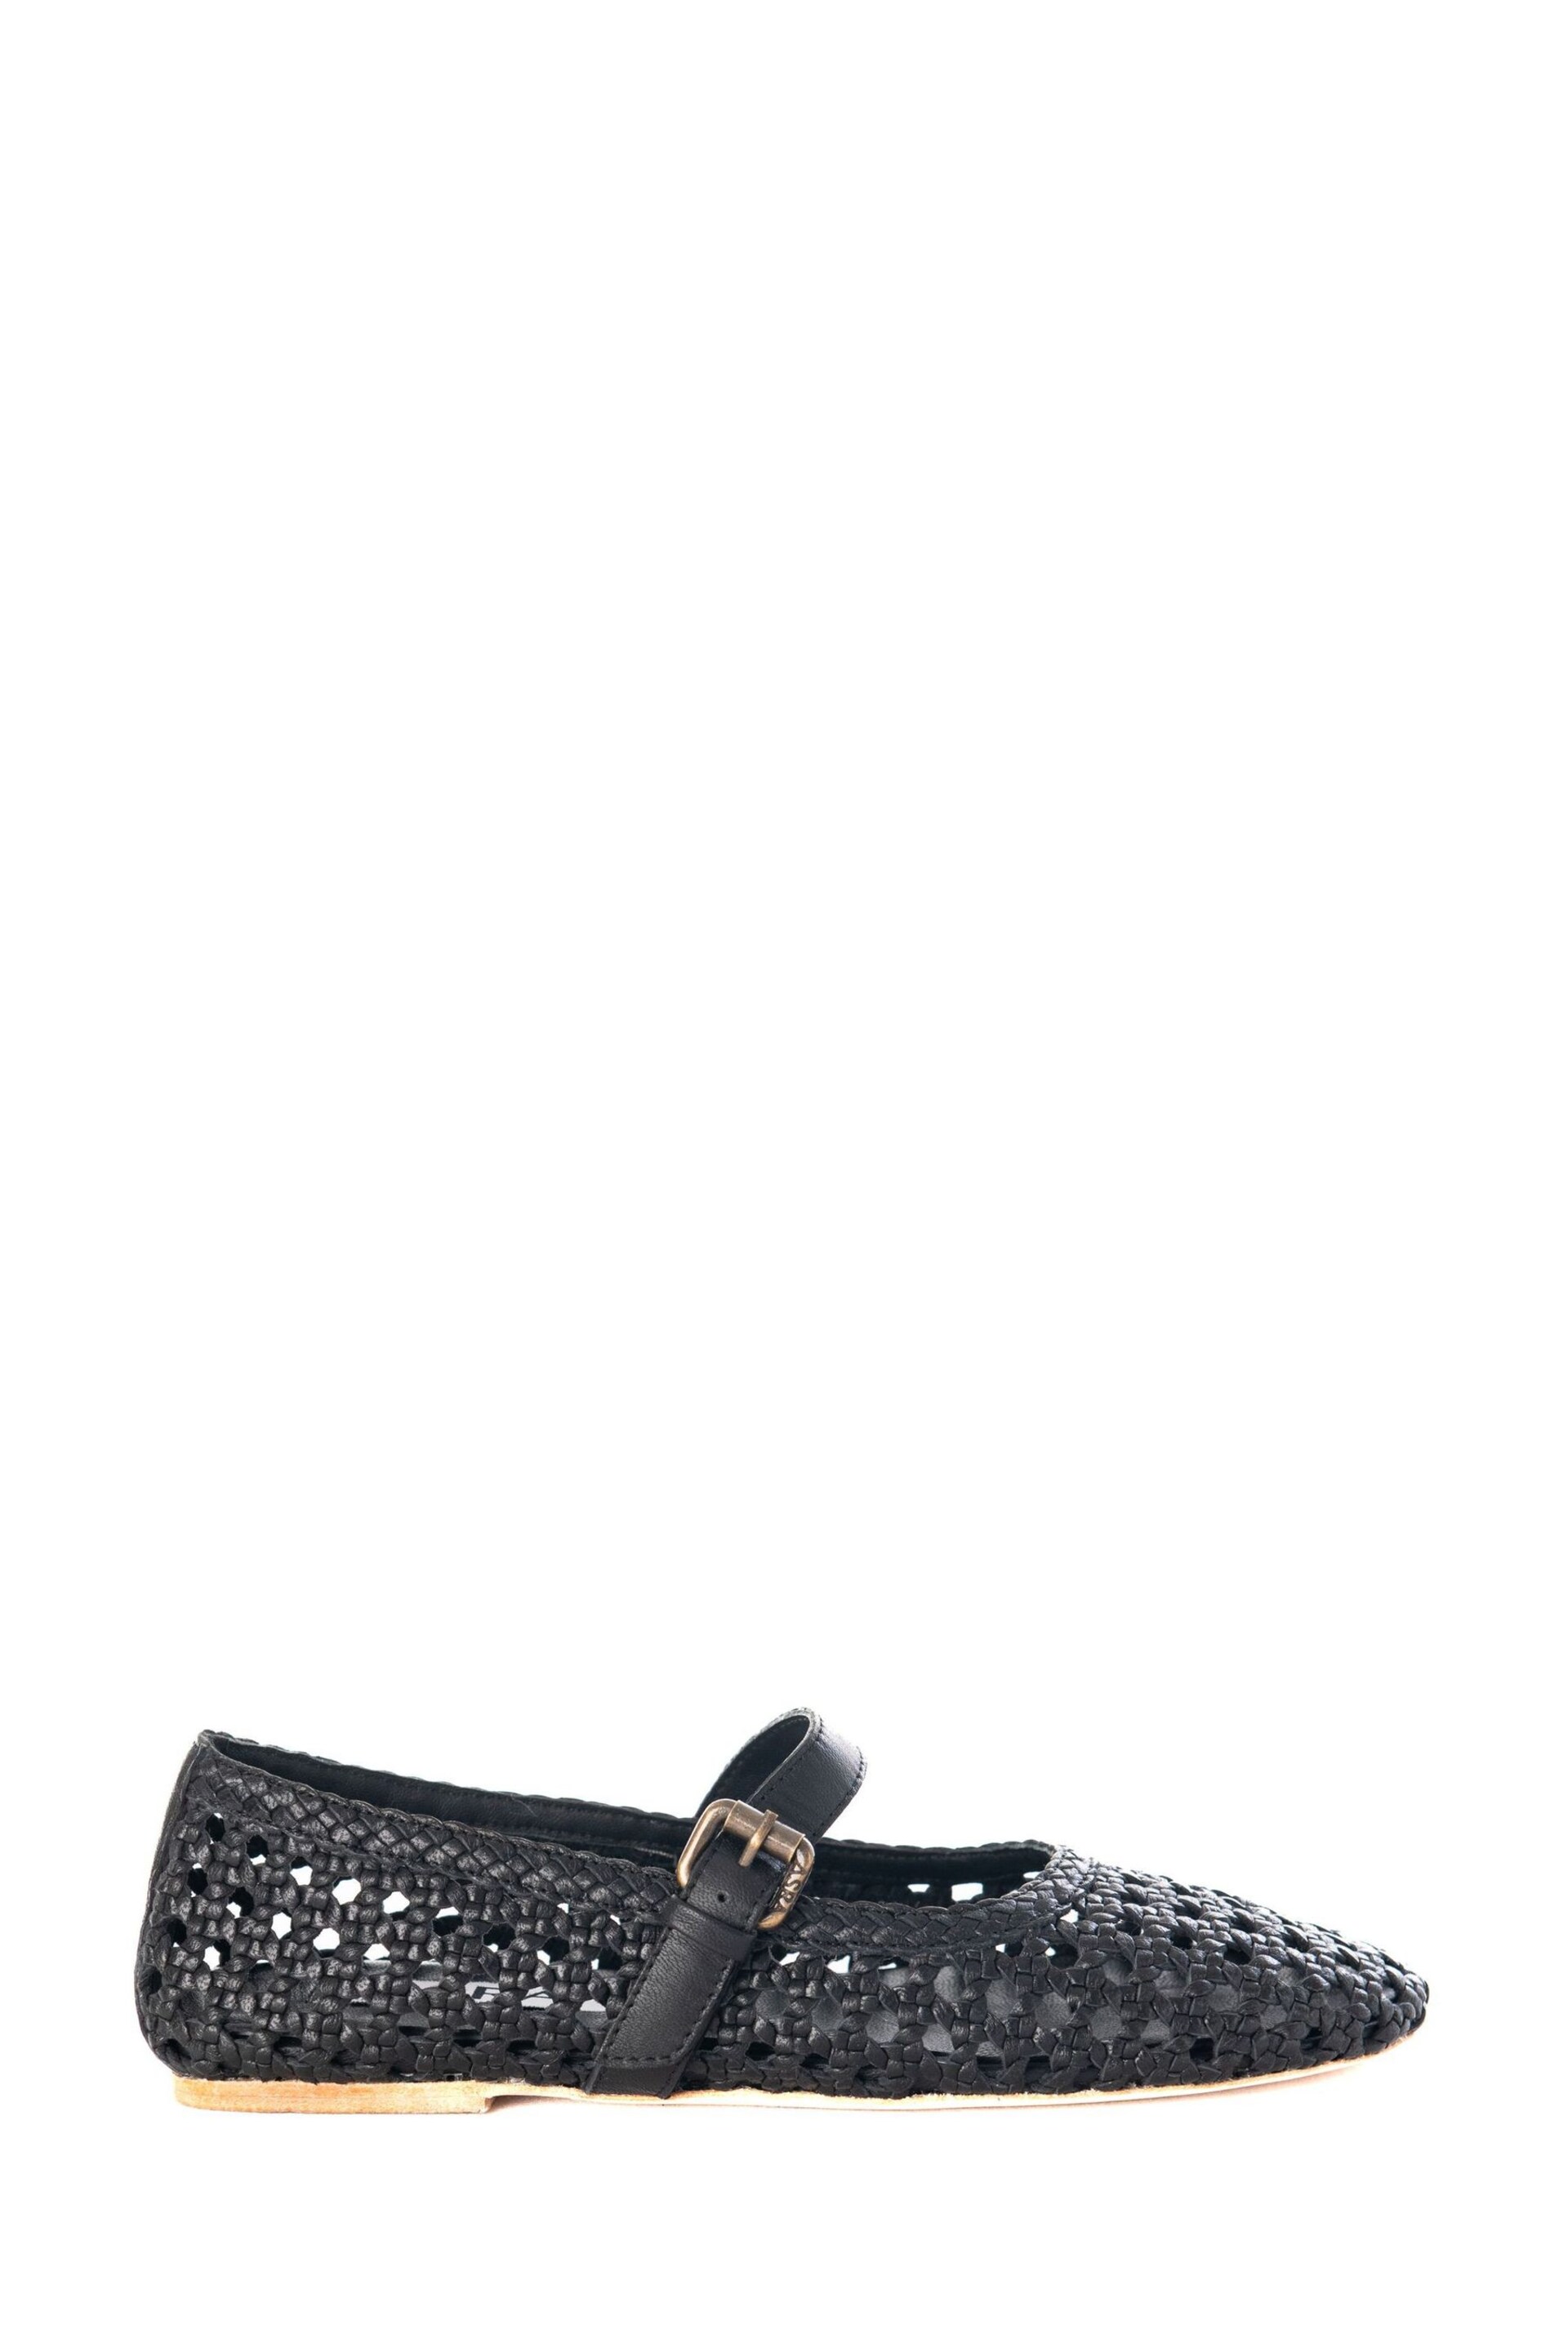 ASRA London Neve Woven Leather Strap Ballerina Black Shoes - Image 1 of 4